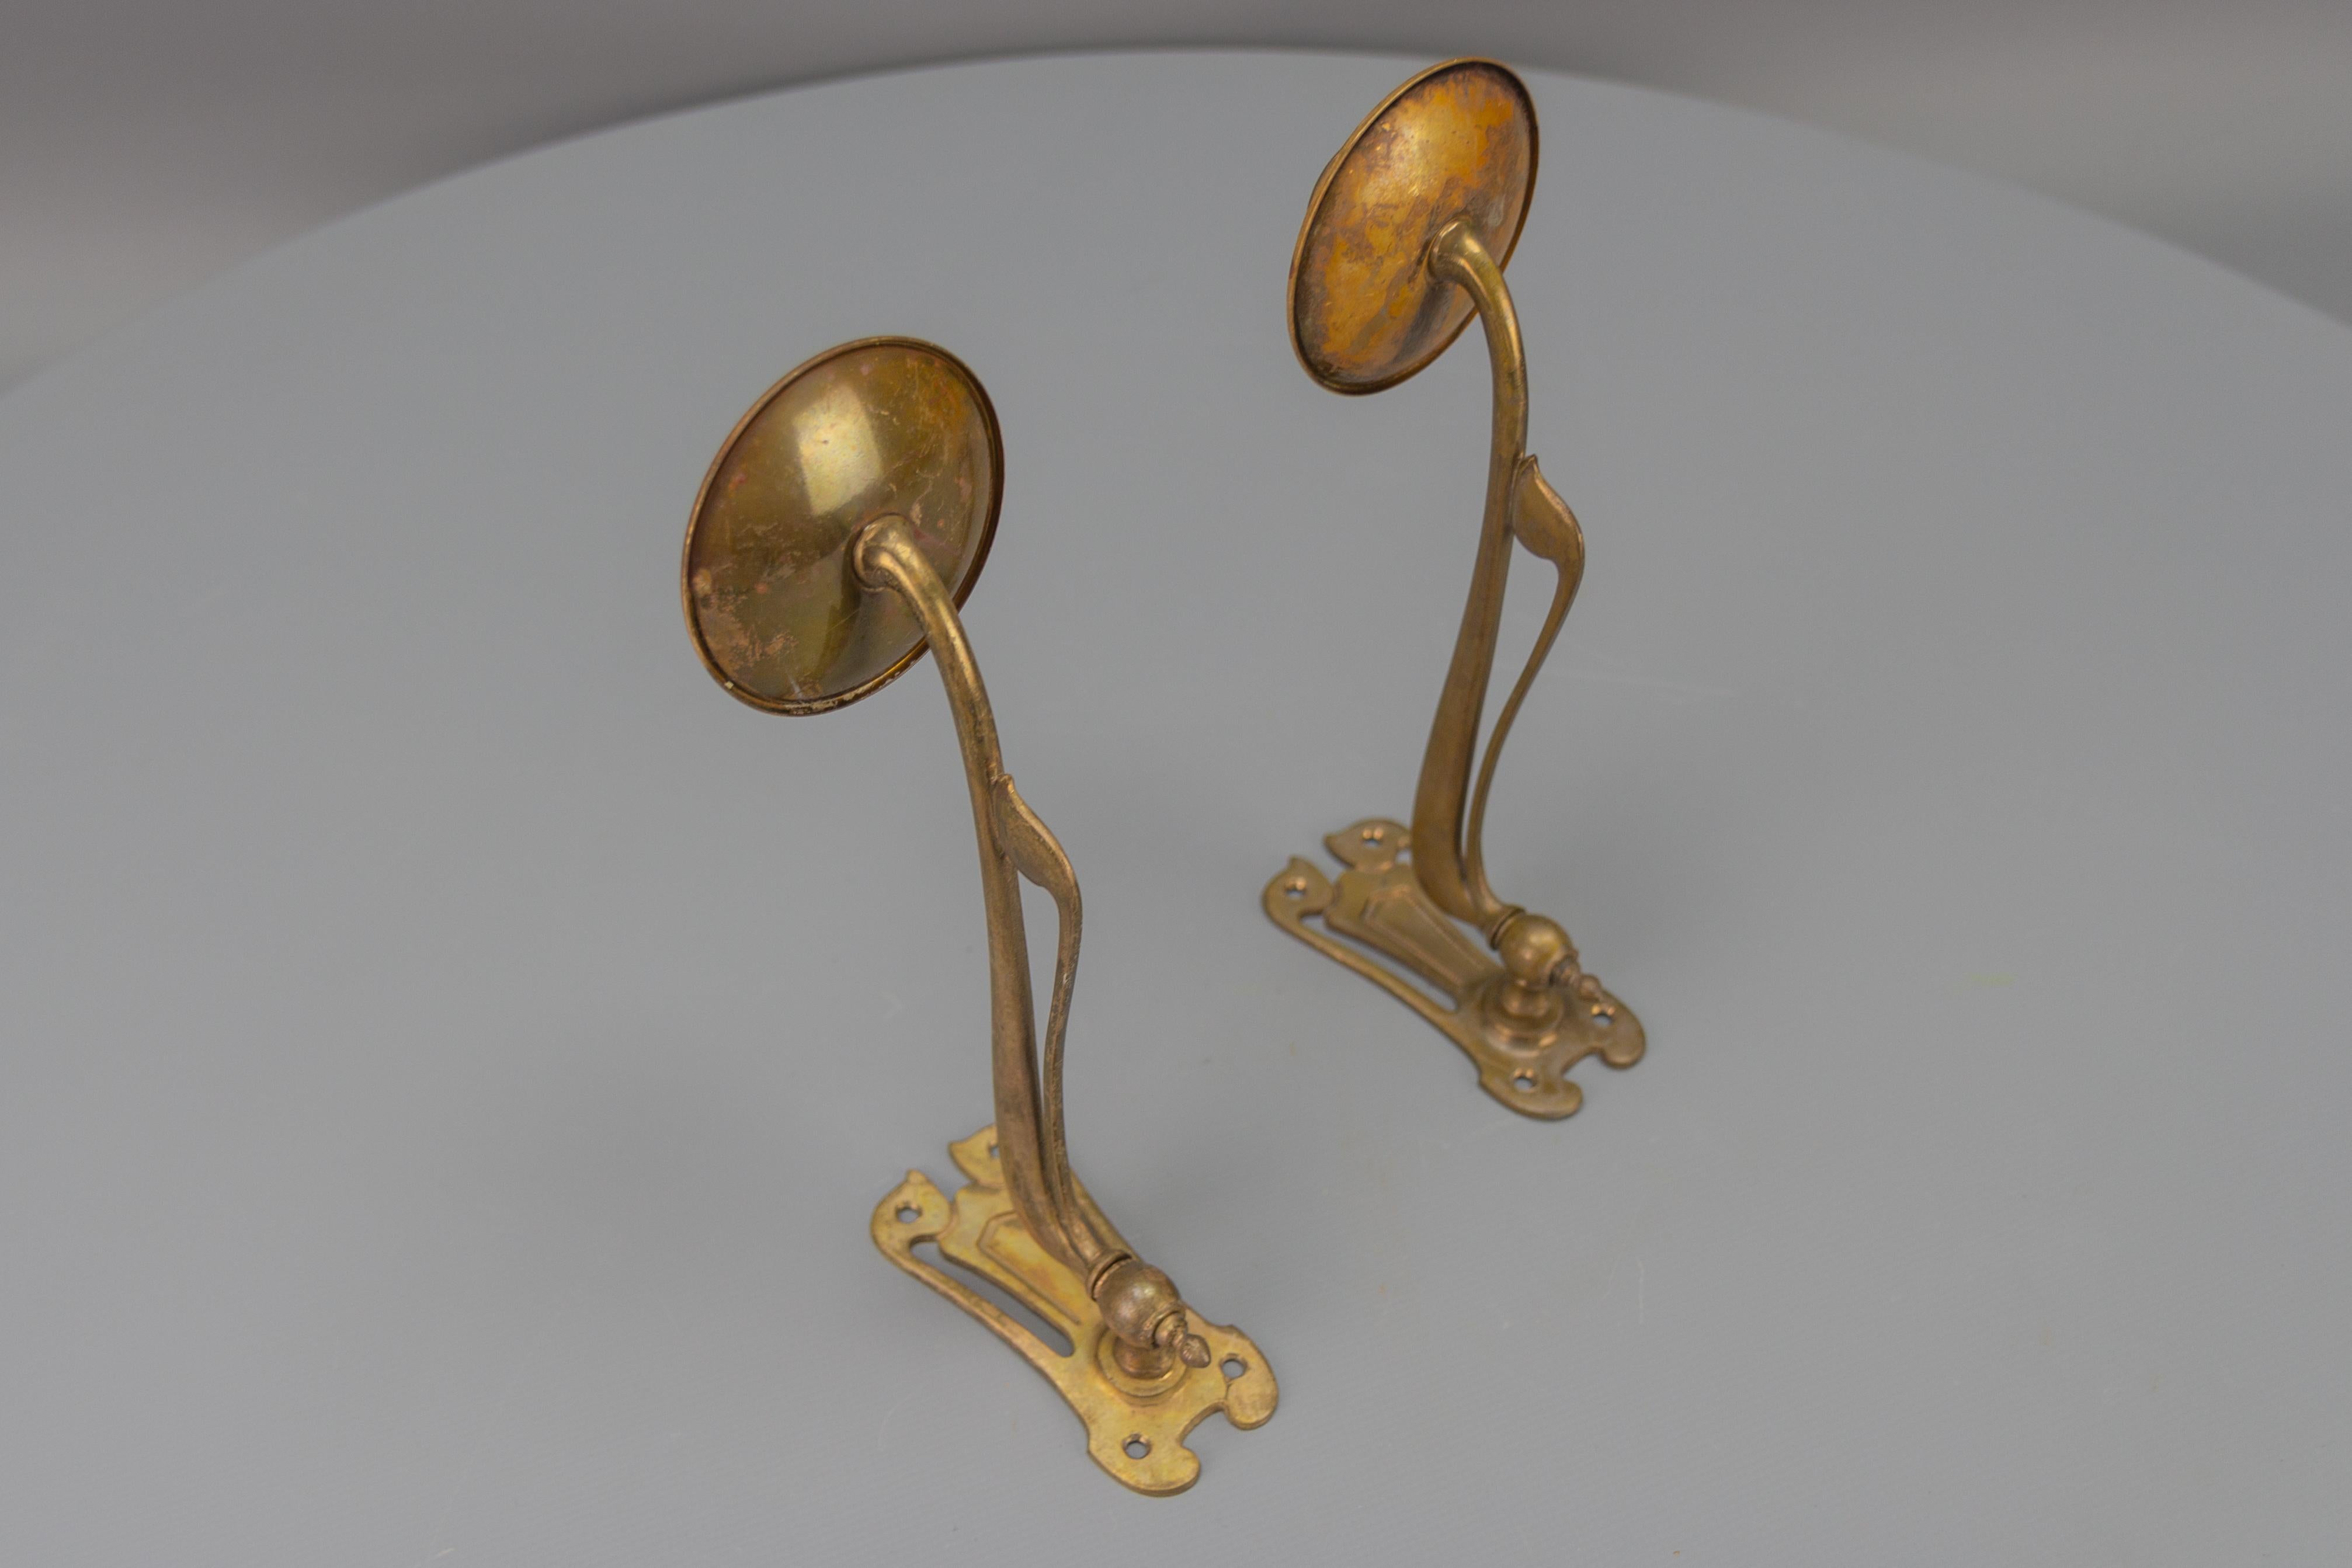 Pair of French Art Nouveau Brass Piano Wall Sconces Swivel Candle Holders, 1920 For Sale 3